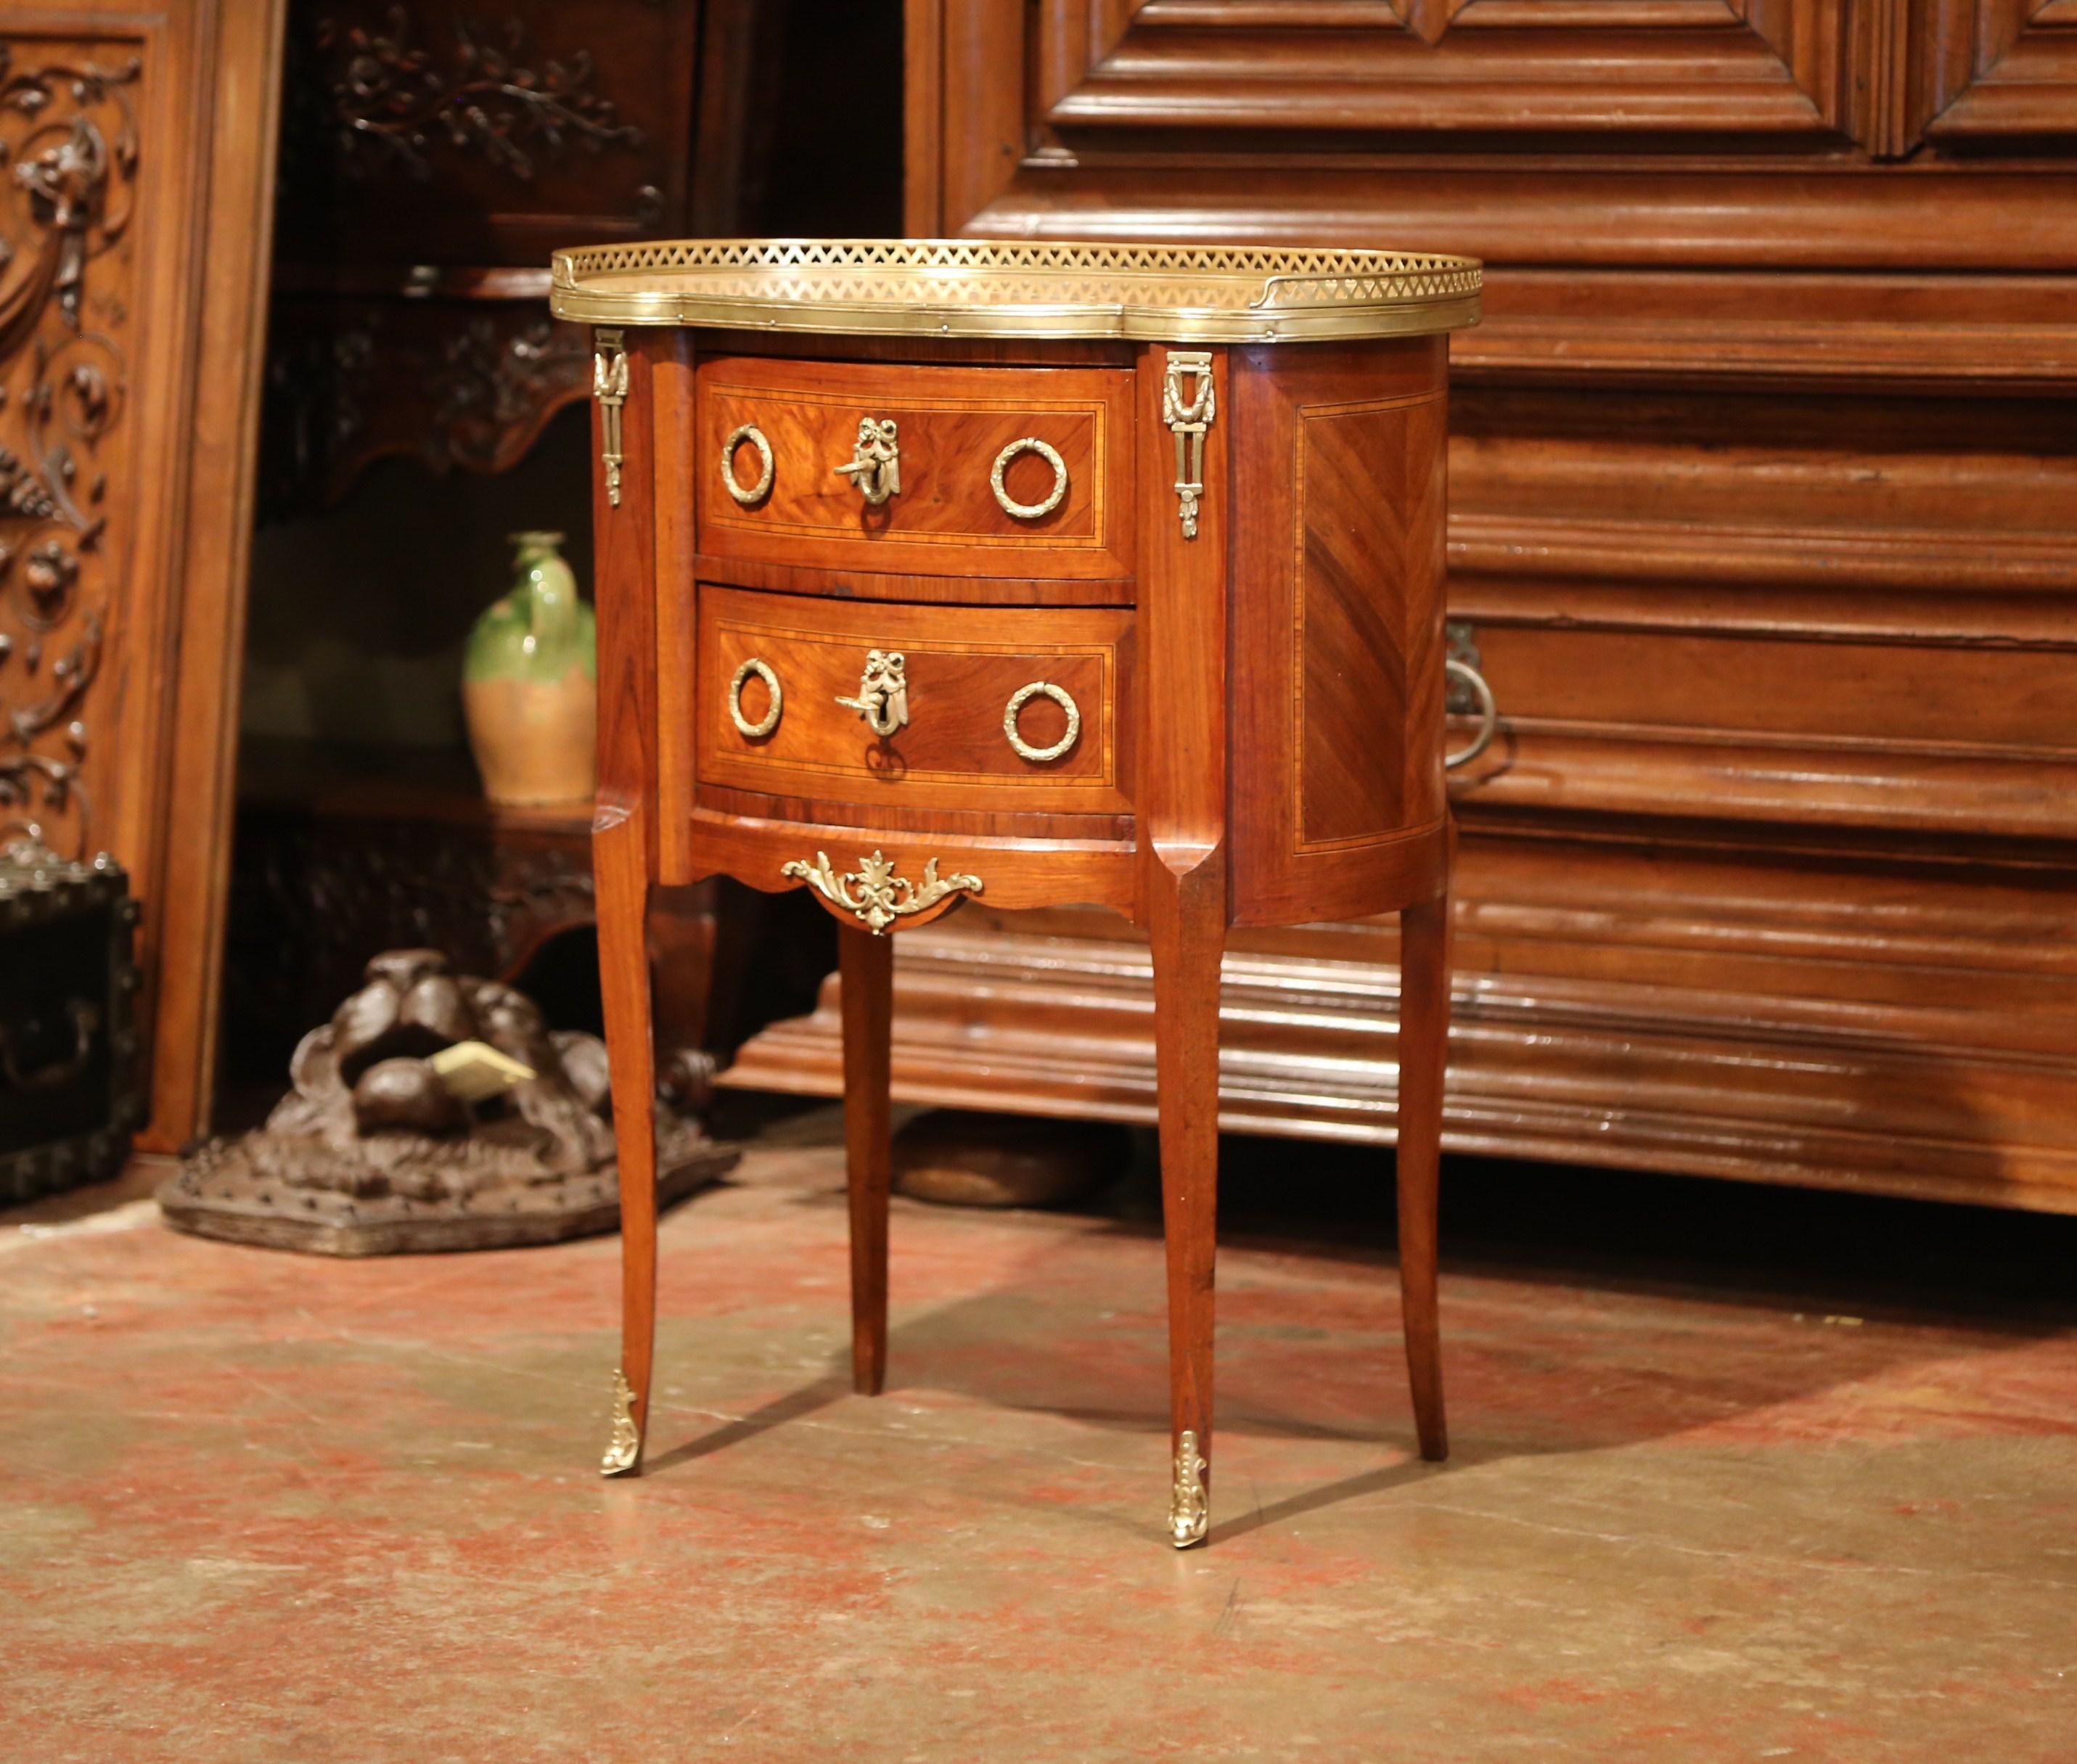 This elegant, kidney-shaped fruitwood commode is a versatile side cabinet for any room. Crafted in Paris, France, circa 1880, this sophisticated, detailed piece could be used as a bedside table, a side table beside an armchair, or as a small storage